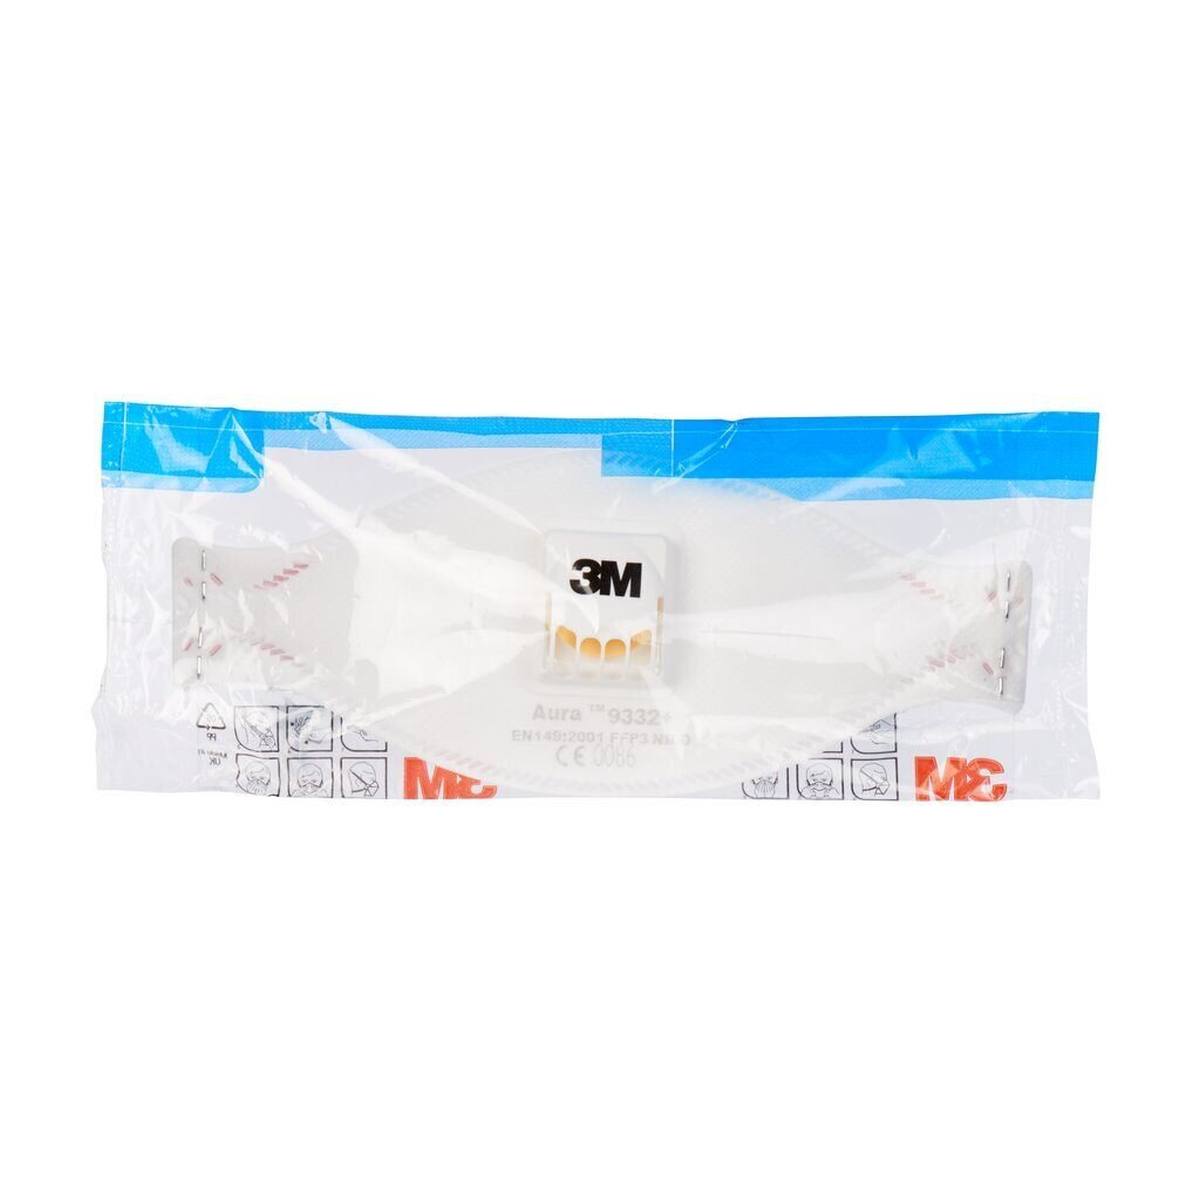 3M 9332+ Aura respirator FFP3 with cool-flow exhalation valve, up to 30 times the limit value (hygienically individually packaged)